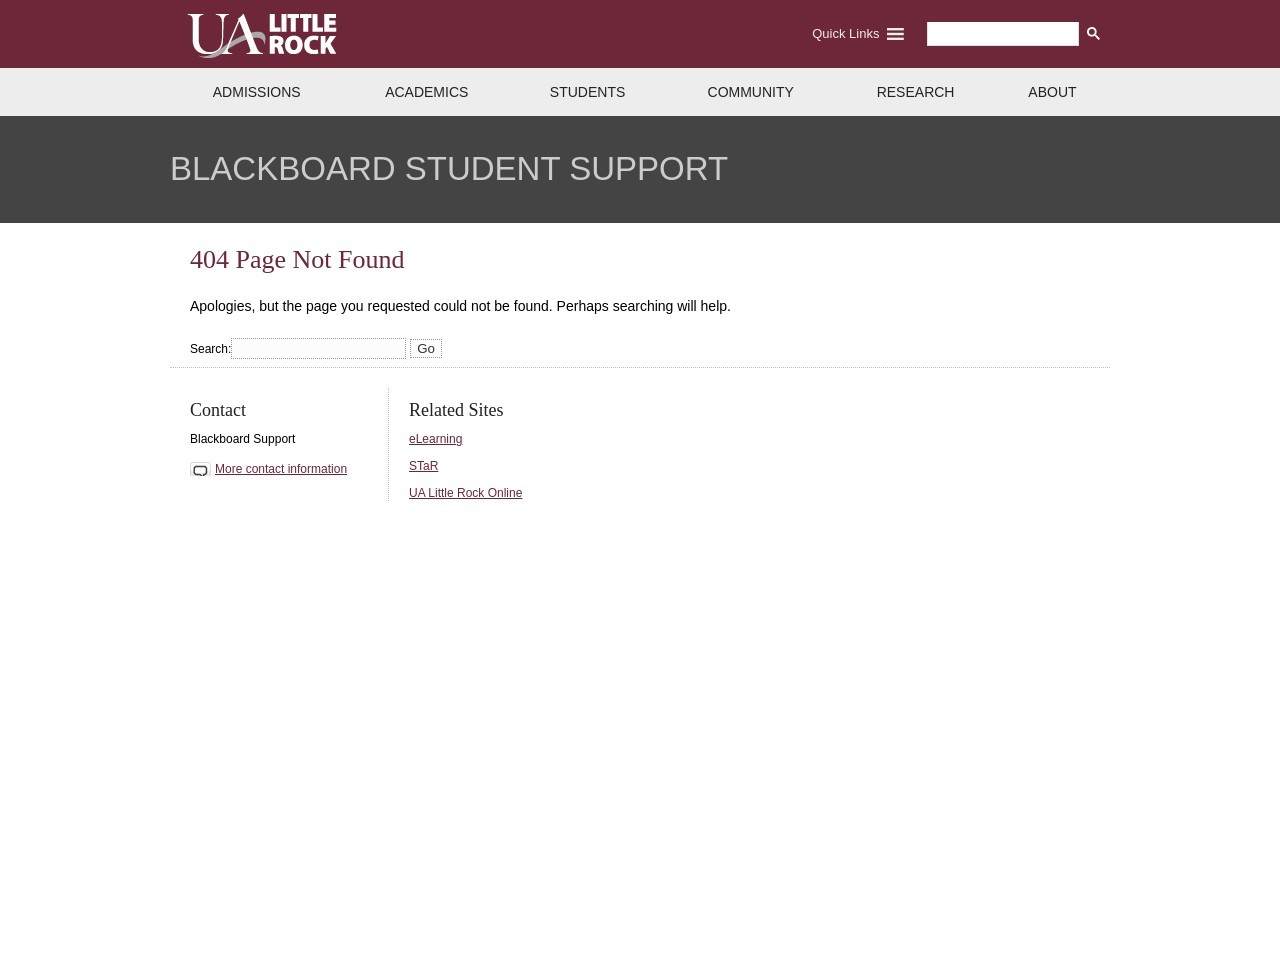 System Requirements - Blackboard Student Support